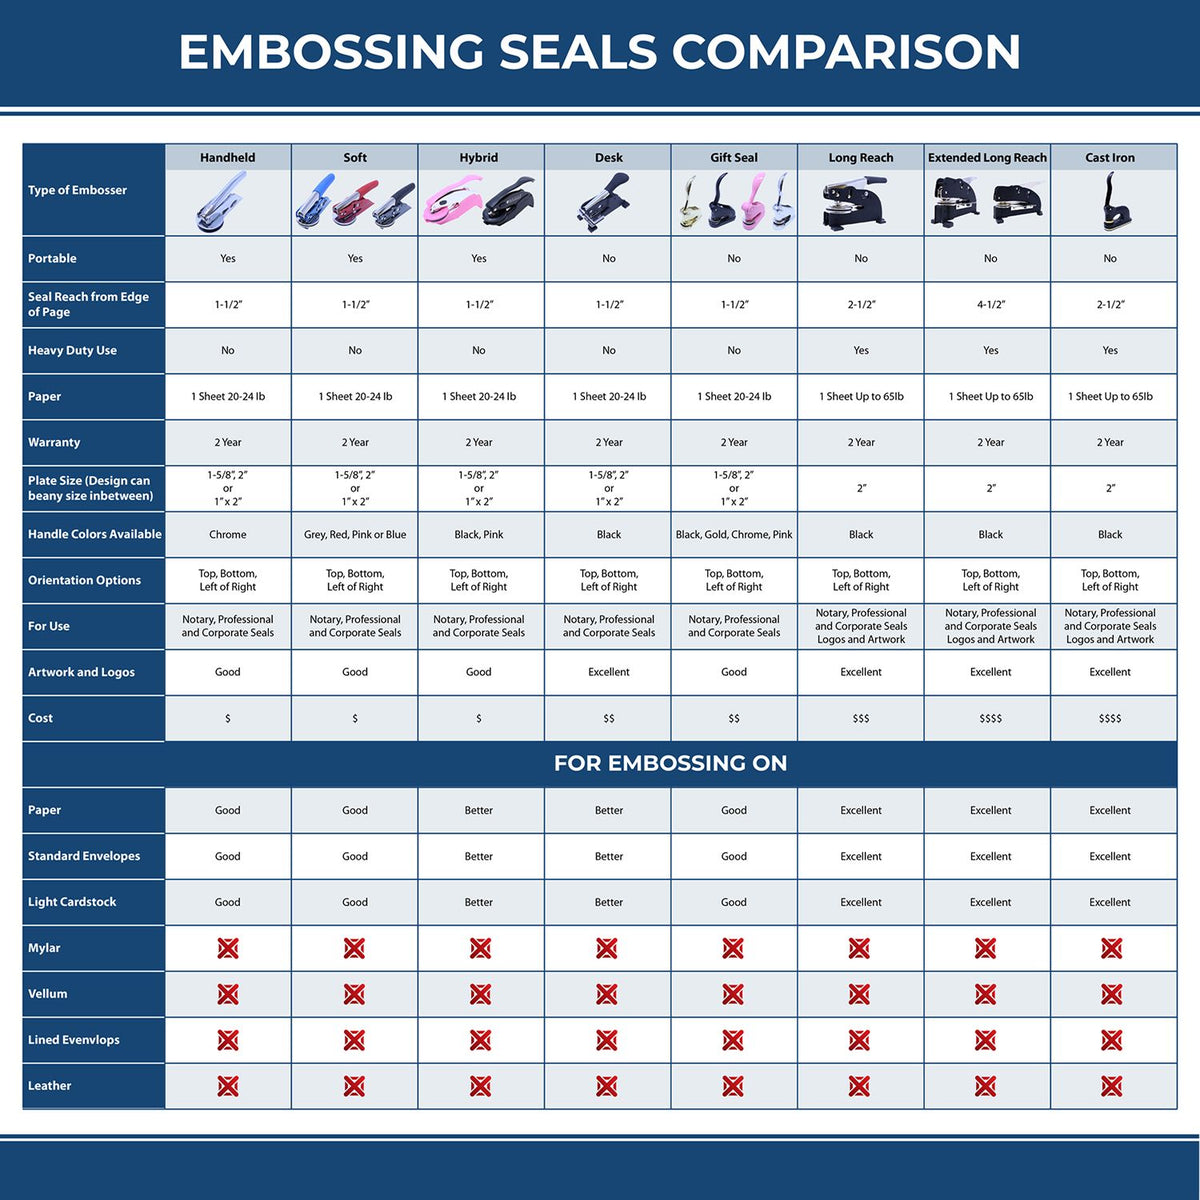 A comparison chart for the different types of mount models available for the State of Maryland Long Reach Architectural Embossing Seal.